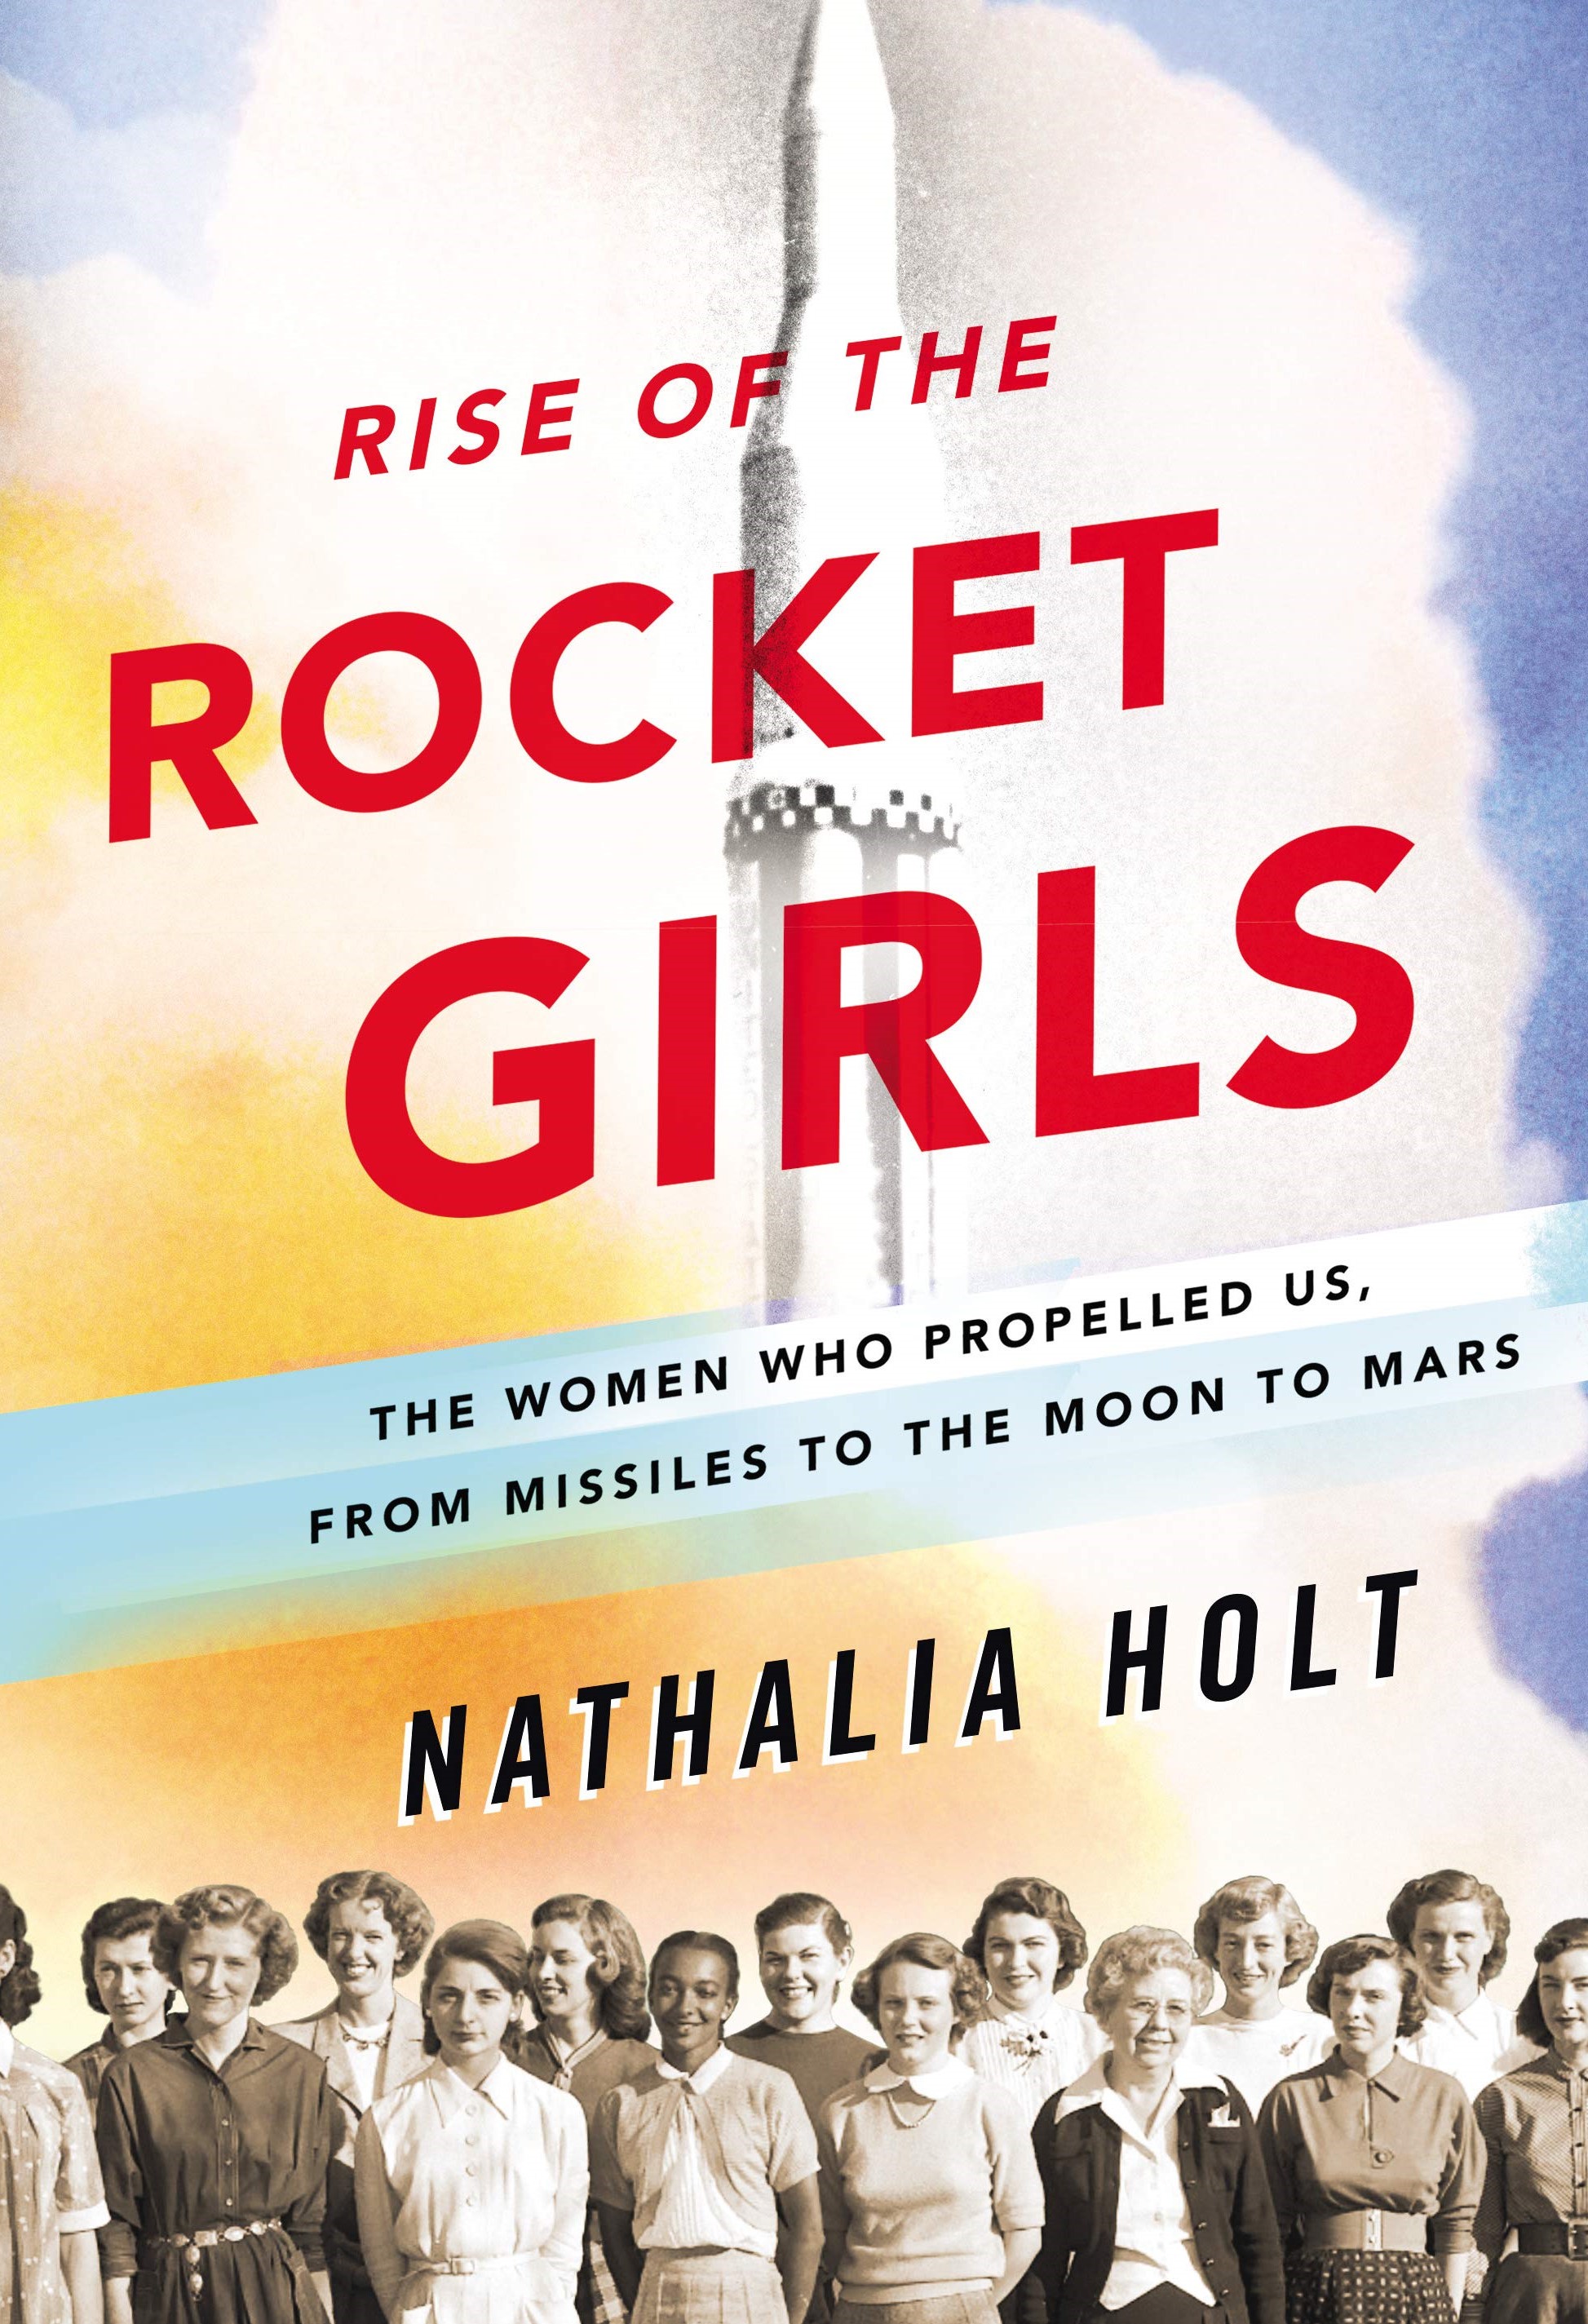  Book club discussion rated this a 2 star read. This book was loaded with historical facts related to the early stages of the fledgling space program. The reader gets a good impression of a time when women generally didn’t spend a lot of time on scho